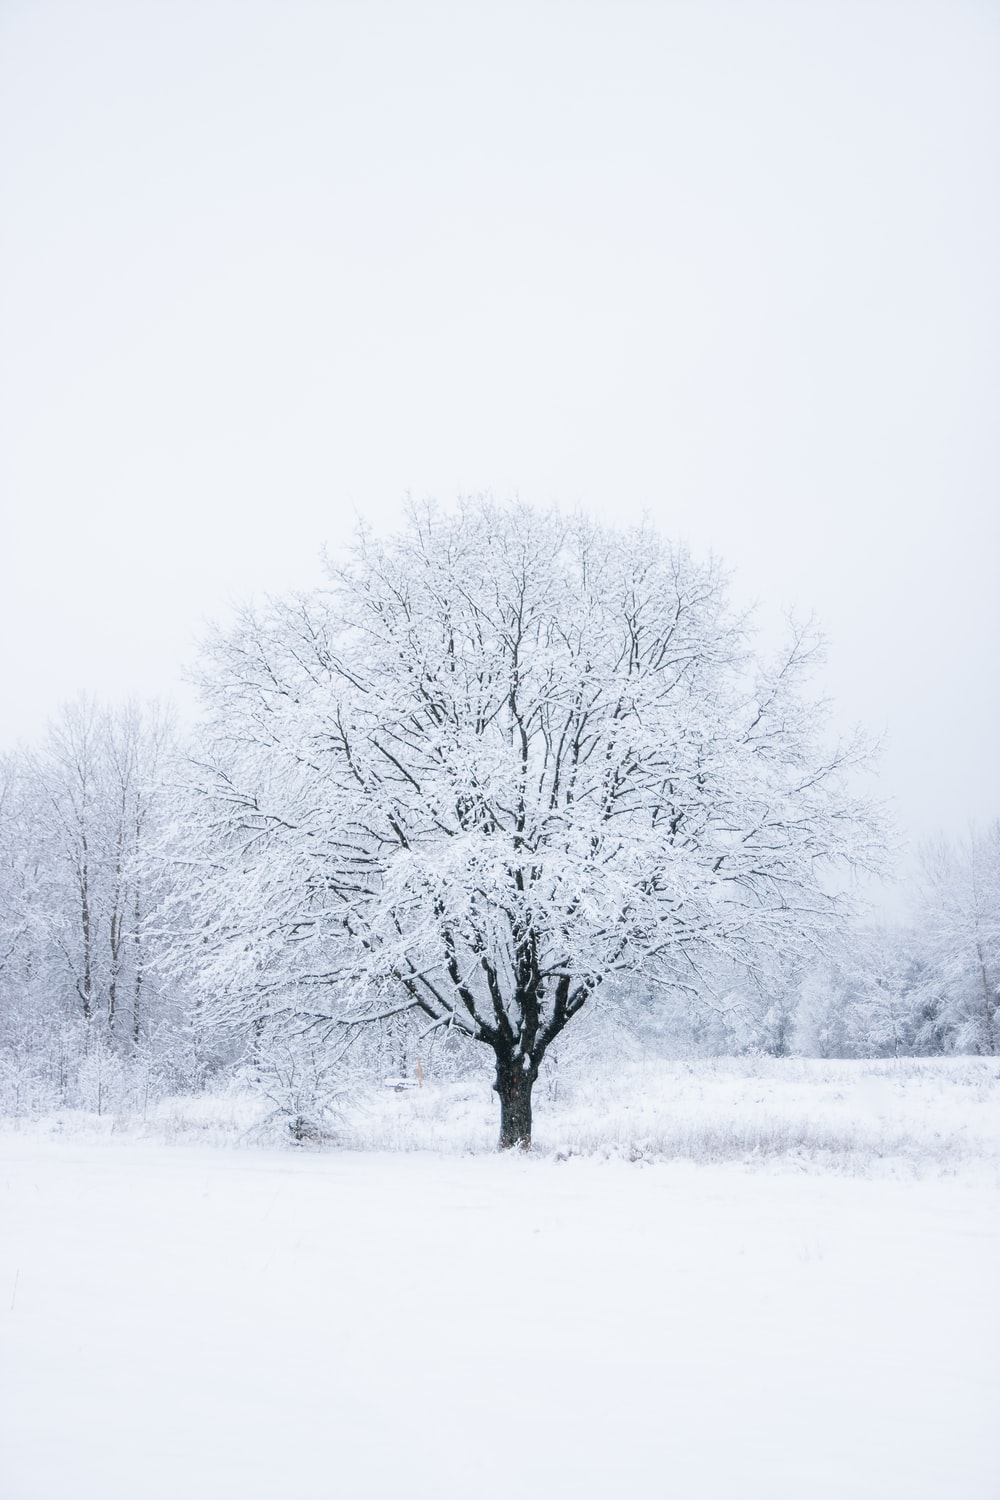 Snow Tree Picture. Download Free Image